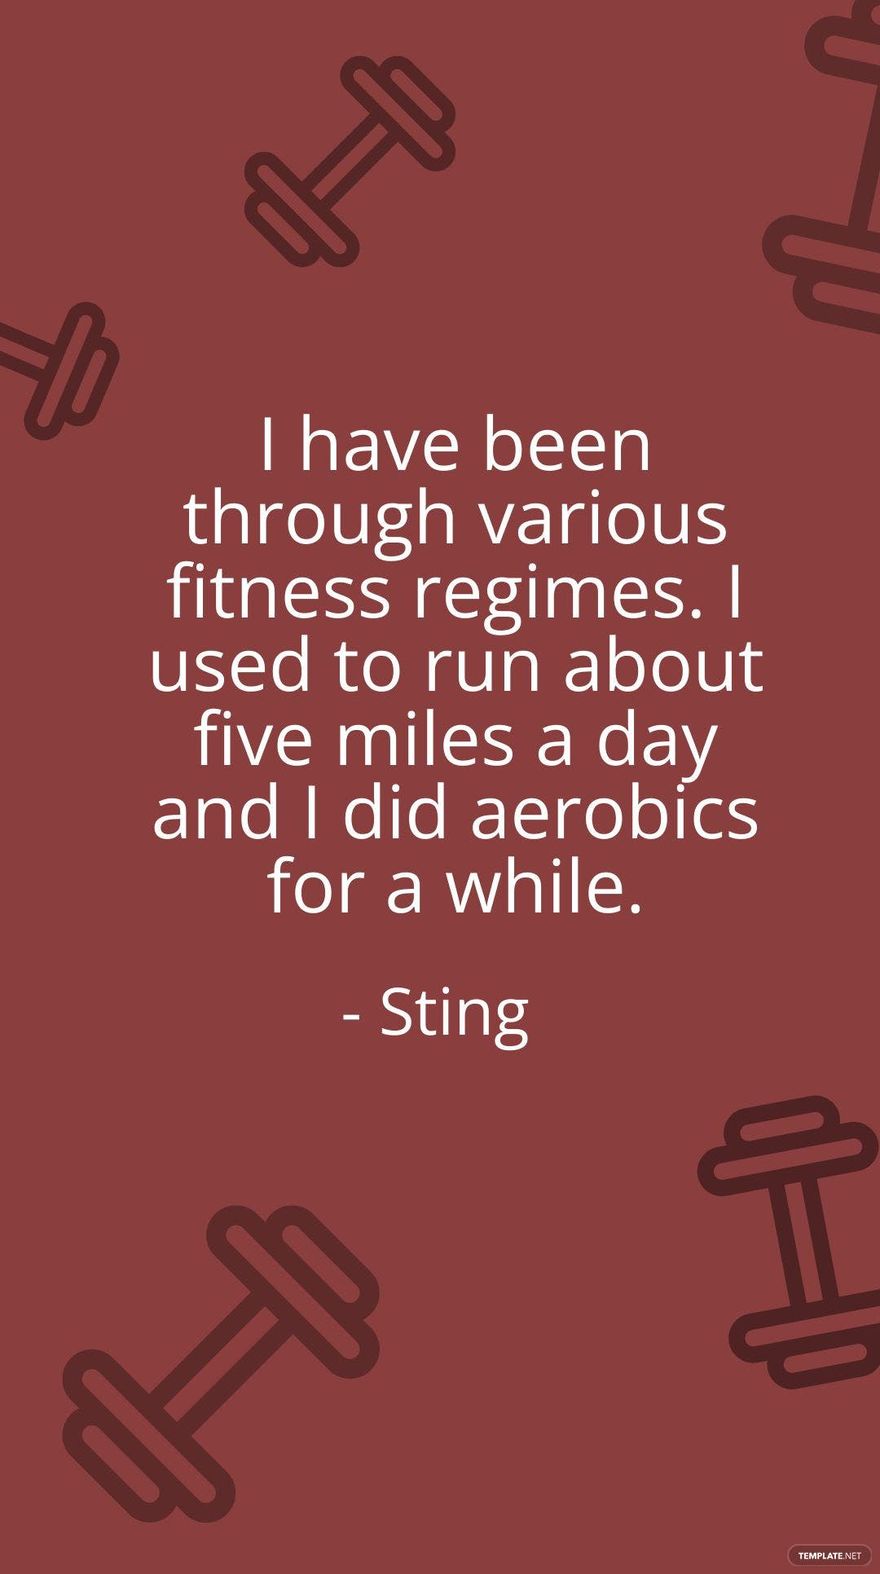 Free Sting - I have been through various fitness regimes. I used to run about five miles a day and I did aerobics for a while. in JPG